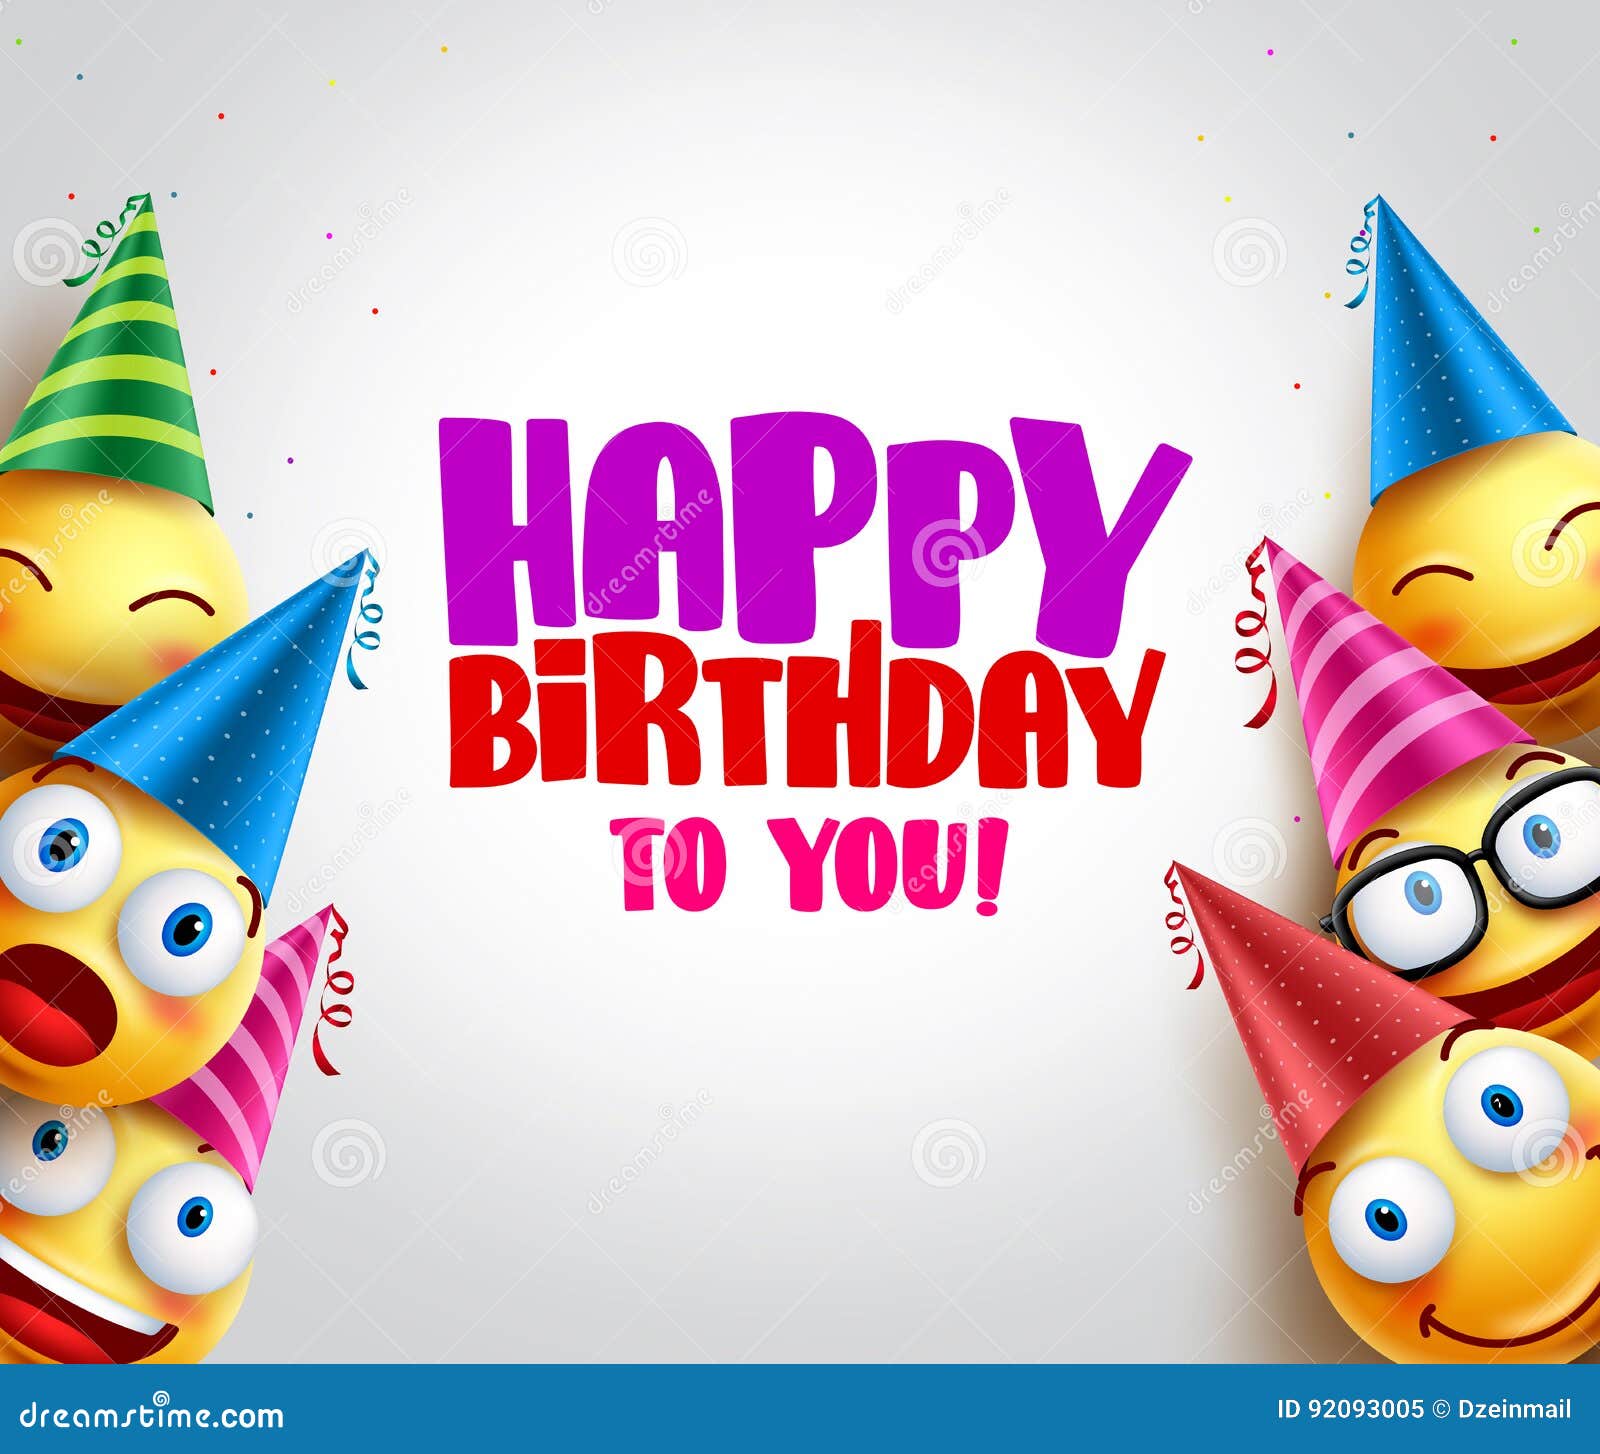 Smileys Vector Background With Happy Birthday Greeting Stock Vector Illustration Of Concept Graphic